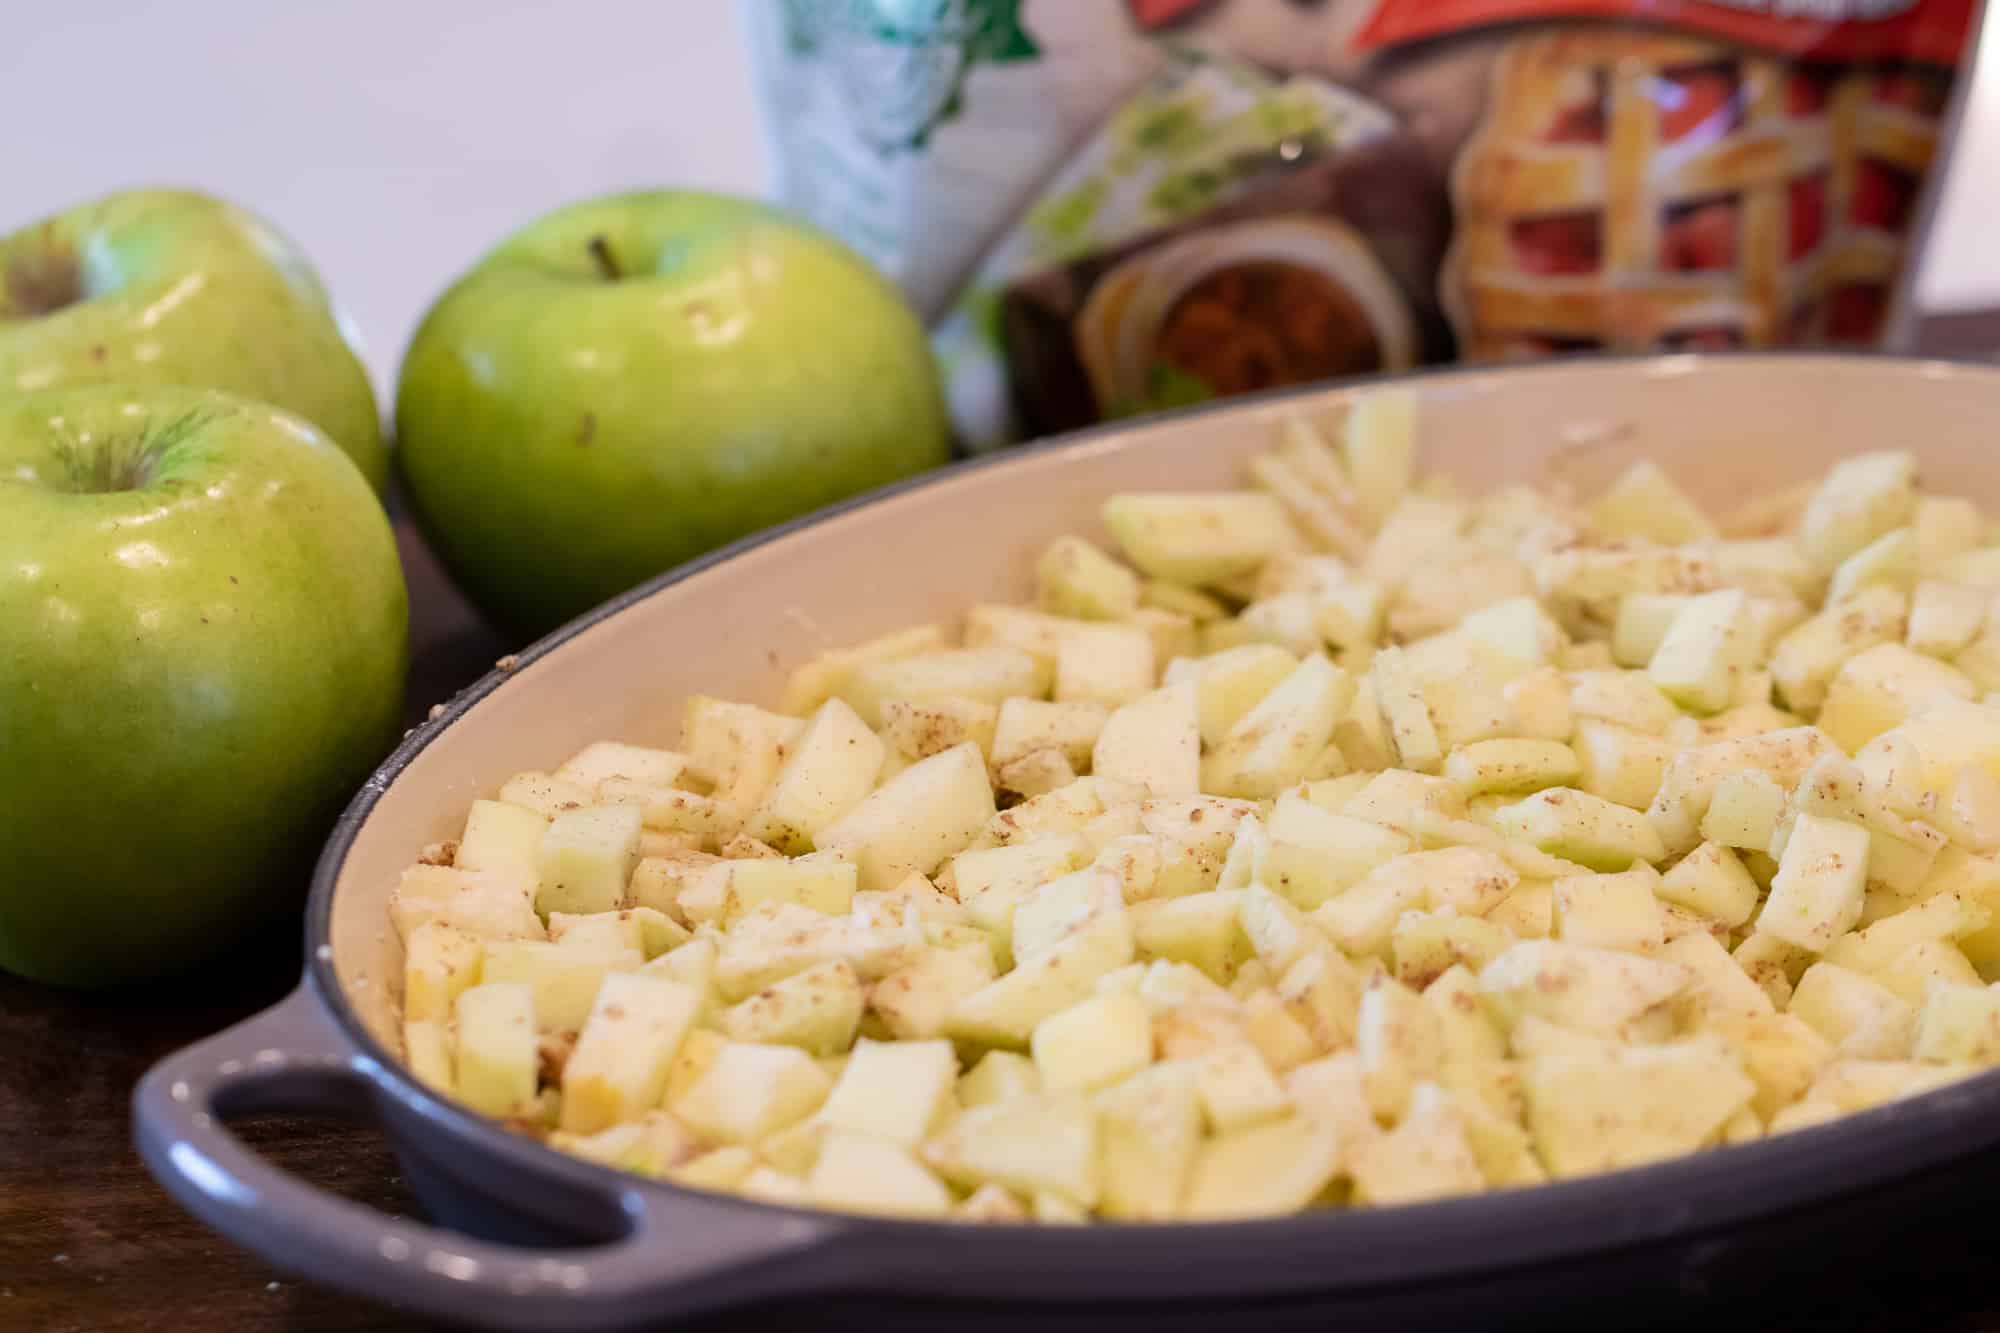 Evenly spread the apples across the bottom of the dish